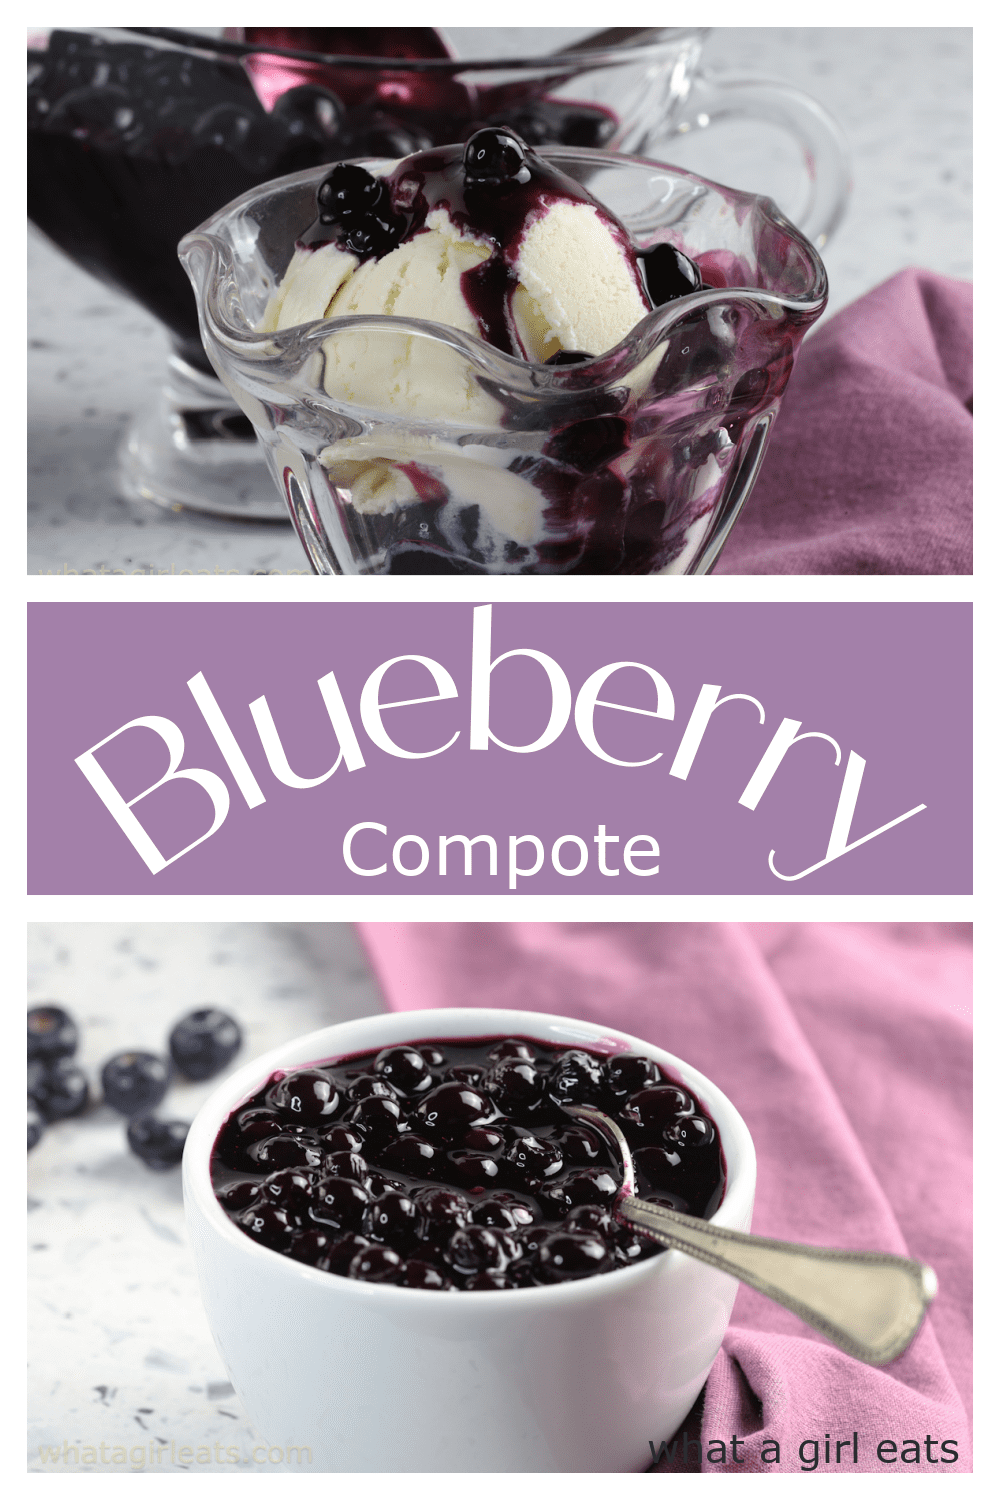 Blueberry compote is a delicious and easy dessert sauce. It's the perfect topping for ice cream, blintzes, cheesecake and more.